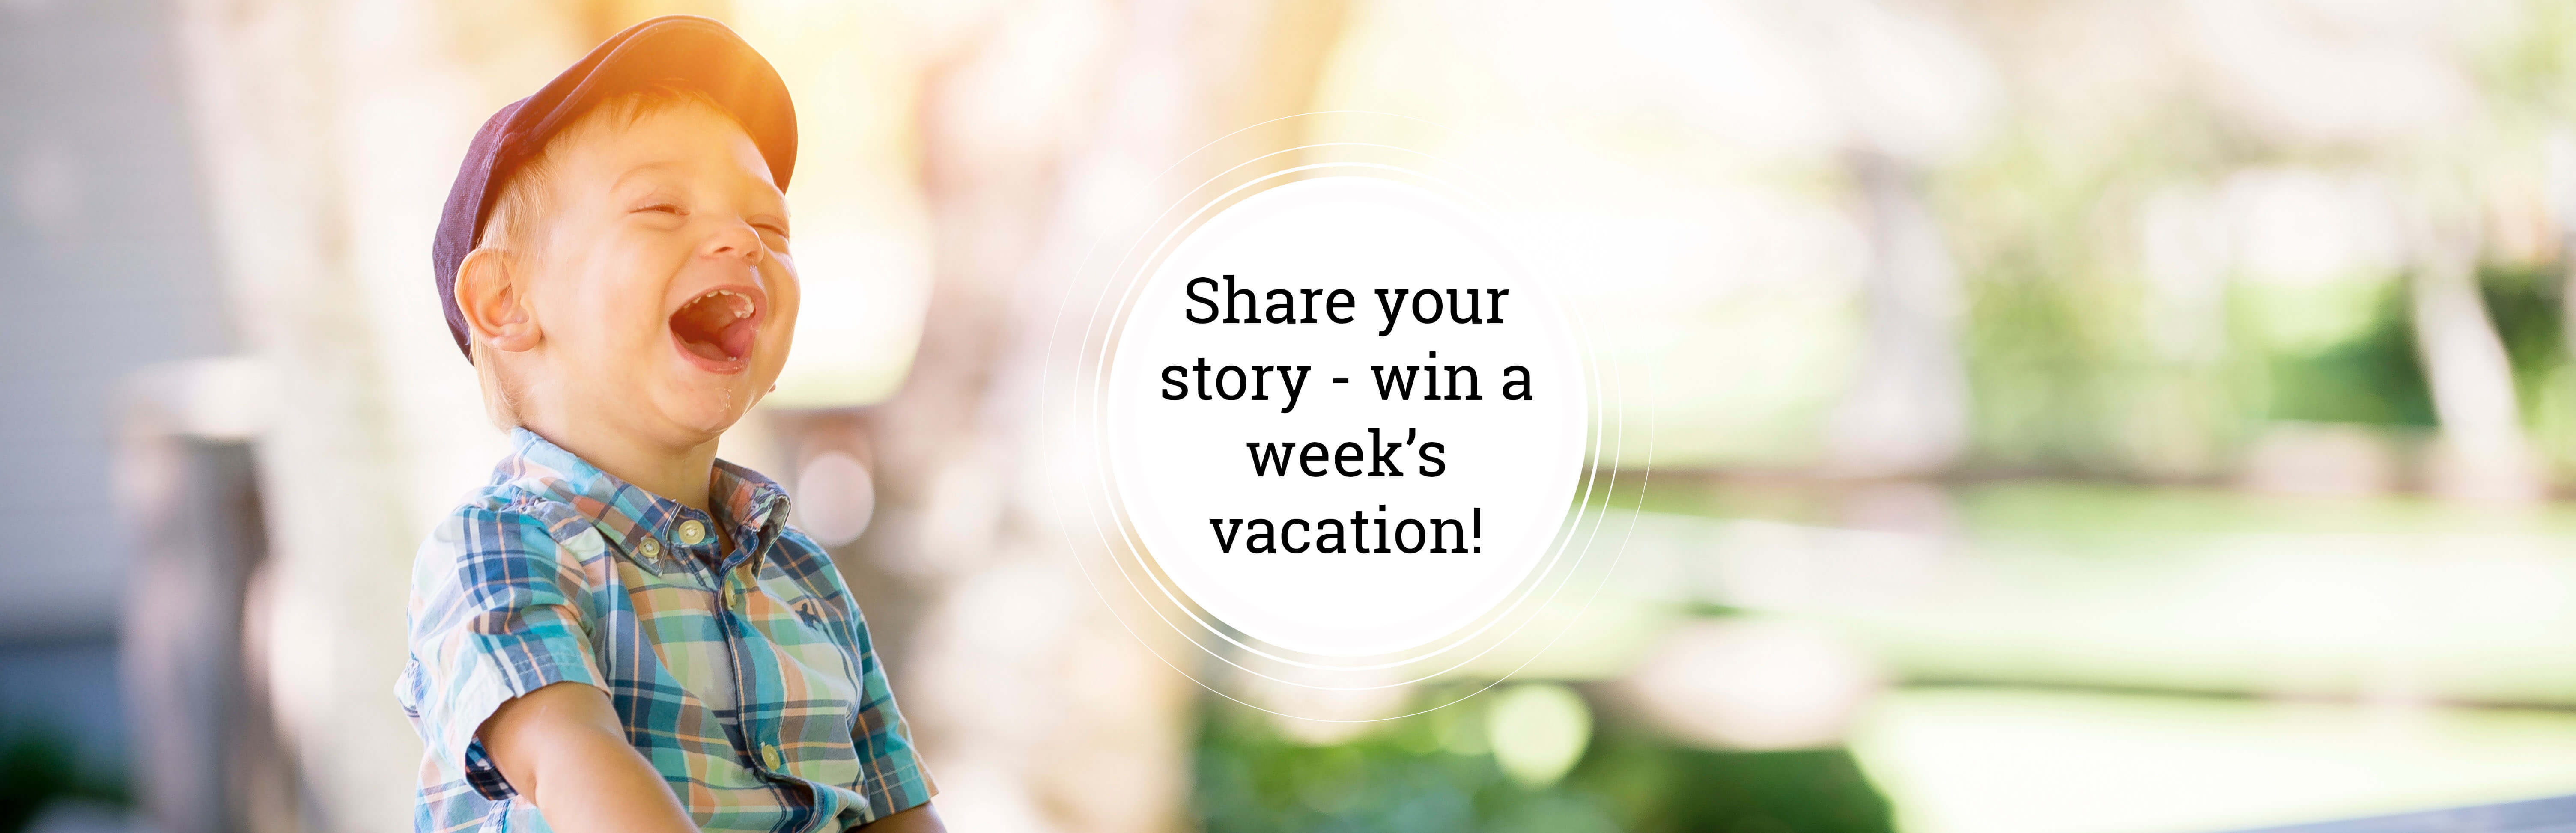 Win a trip to Newport Overlook!  Share a story for a chance to win.